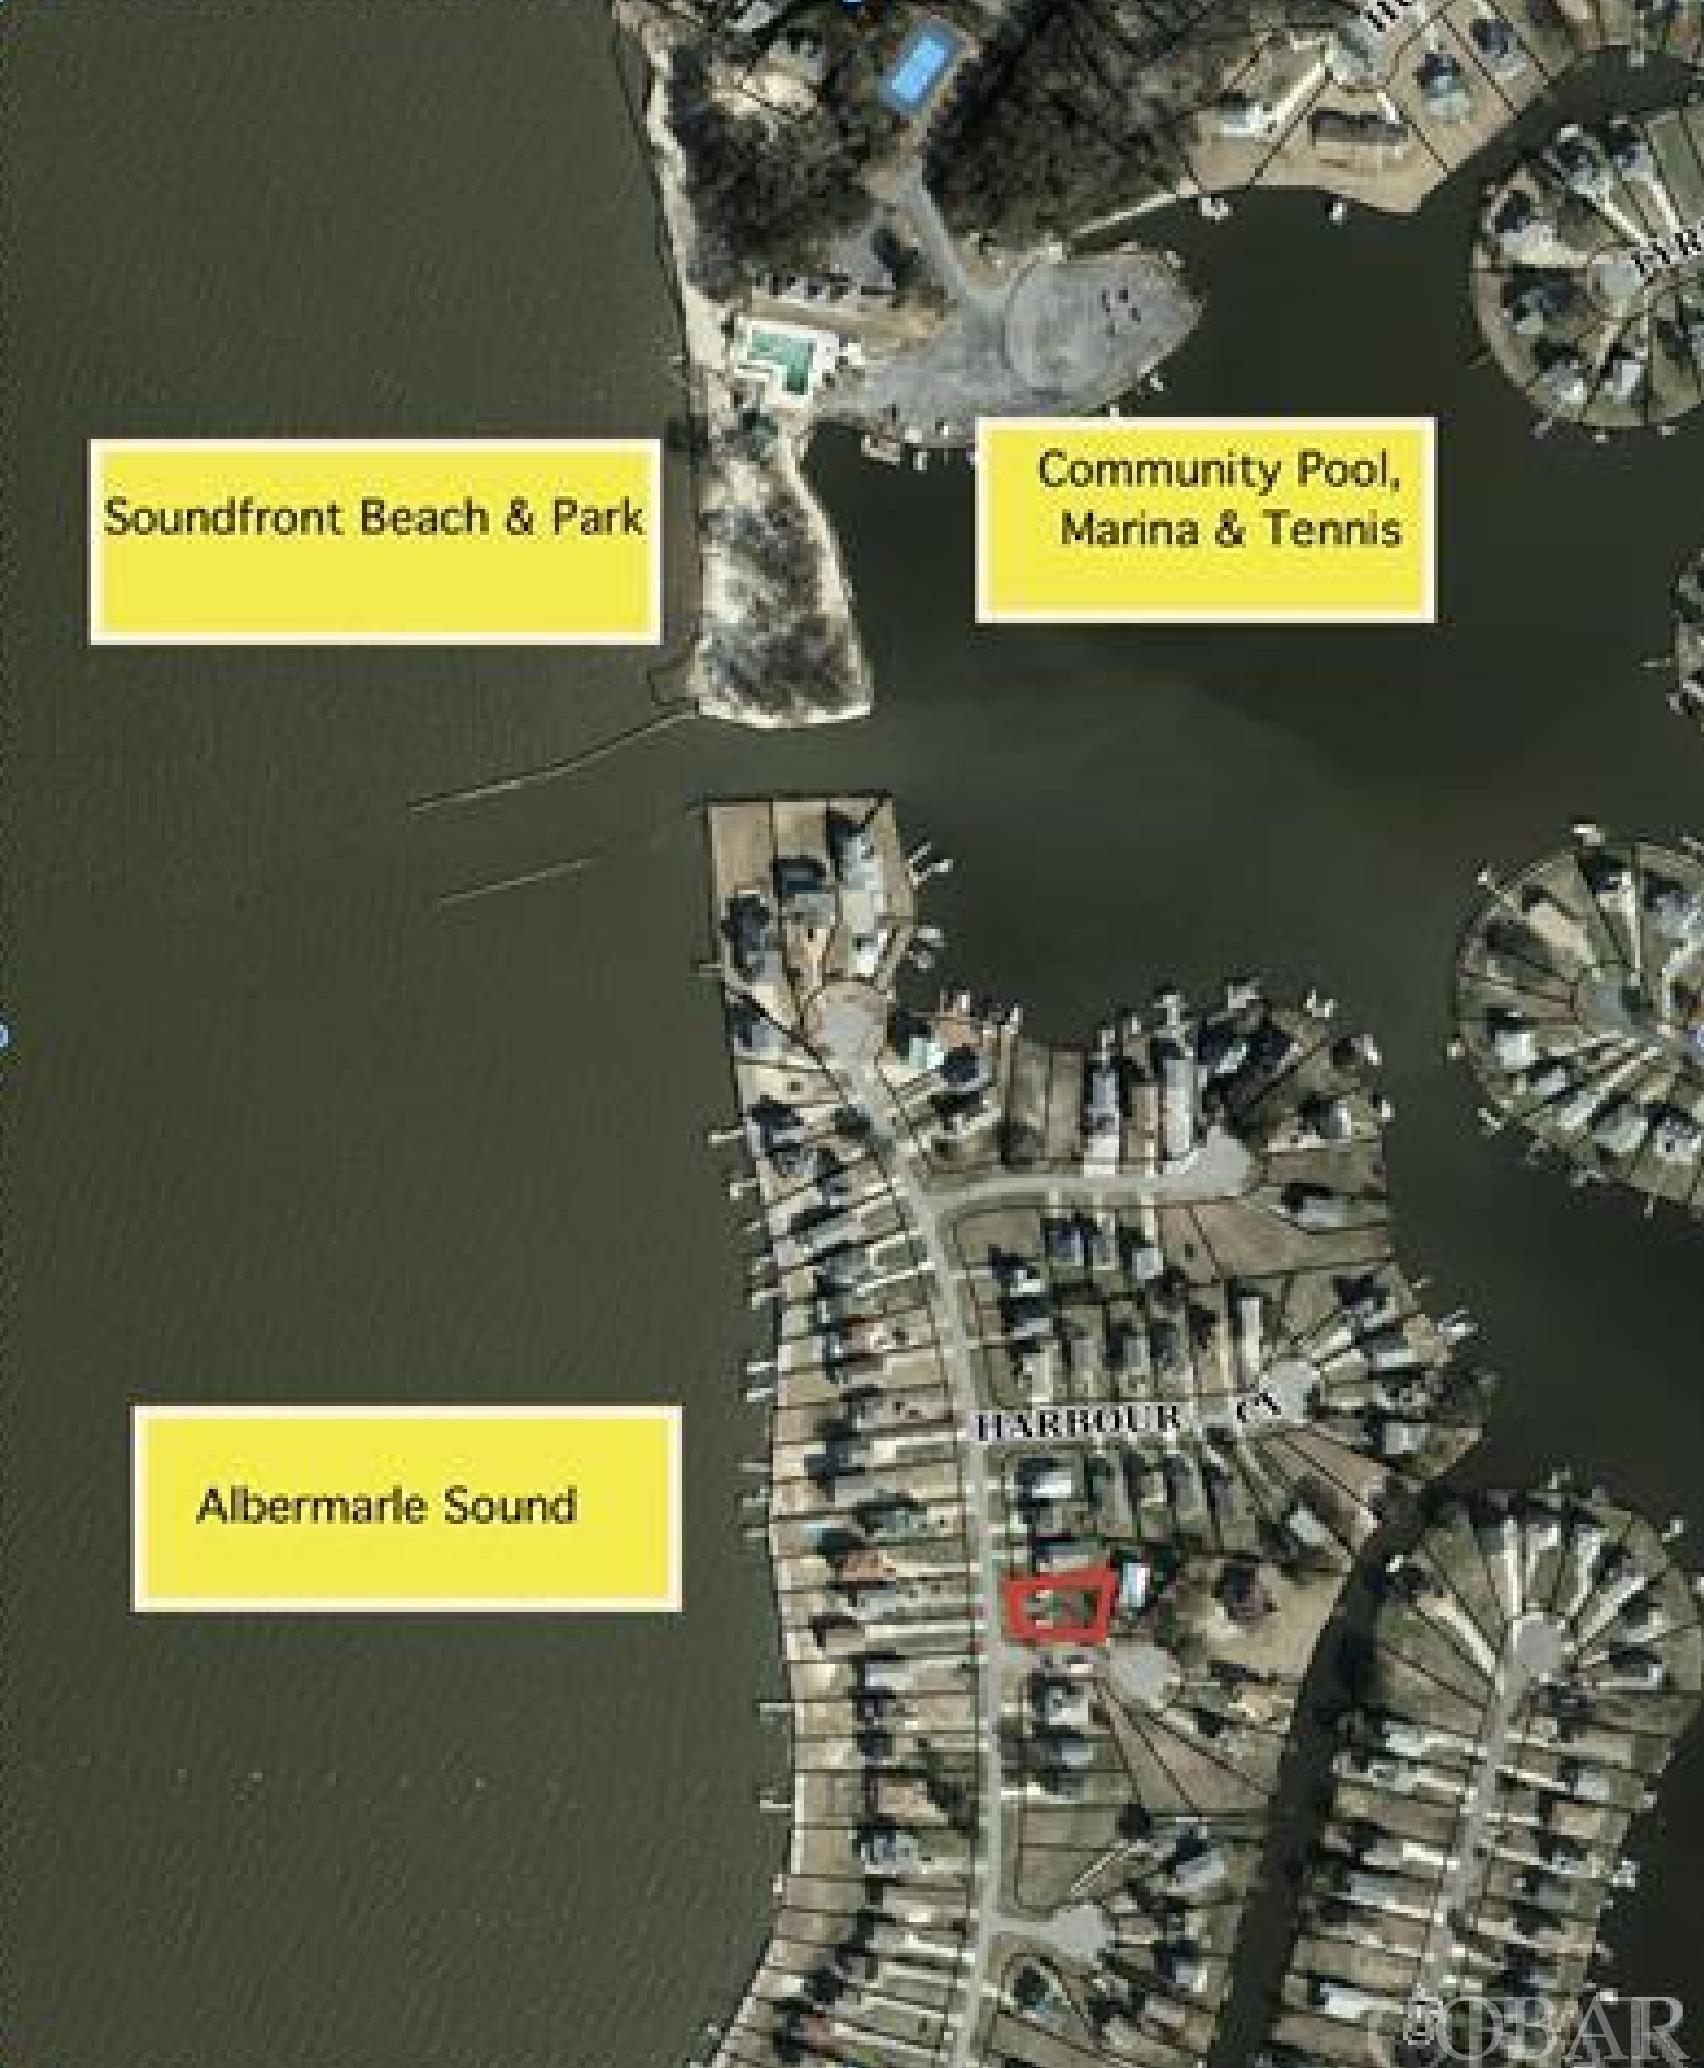 Cleared 8,000 sq.ft semi sound front lot with water views! Perfect opportunity to build your investment, 2nd home or a primary residence. Enjoy the Island Life of Colington Harbour! The Outer Banks of North Carolina's hidden secret is located off the beaten path yet minutes to the lifeguard beach access. Colington Harbour is a waterfront community with 24hr guard-gated security. Take a bike ride to the soundfront beach for amazing sunsets, a dip in the community saltwater pool, play some tennis or basketball and enjoy all your water-sport adventures by utilizing the community boat ramp. Pool and Tennis minimal fee.  Call today!